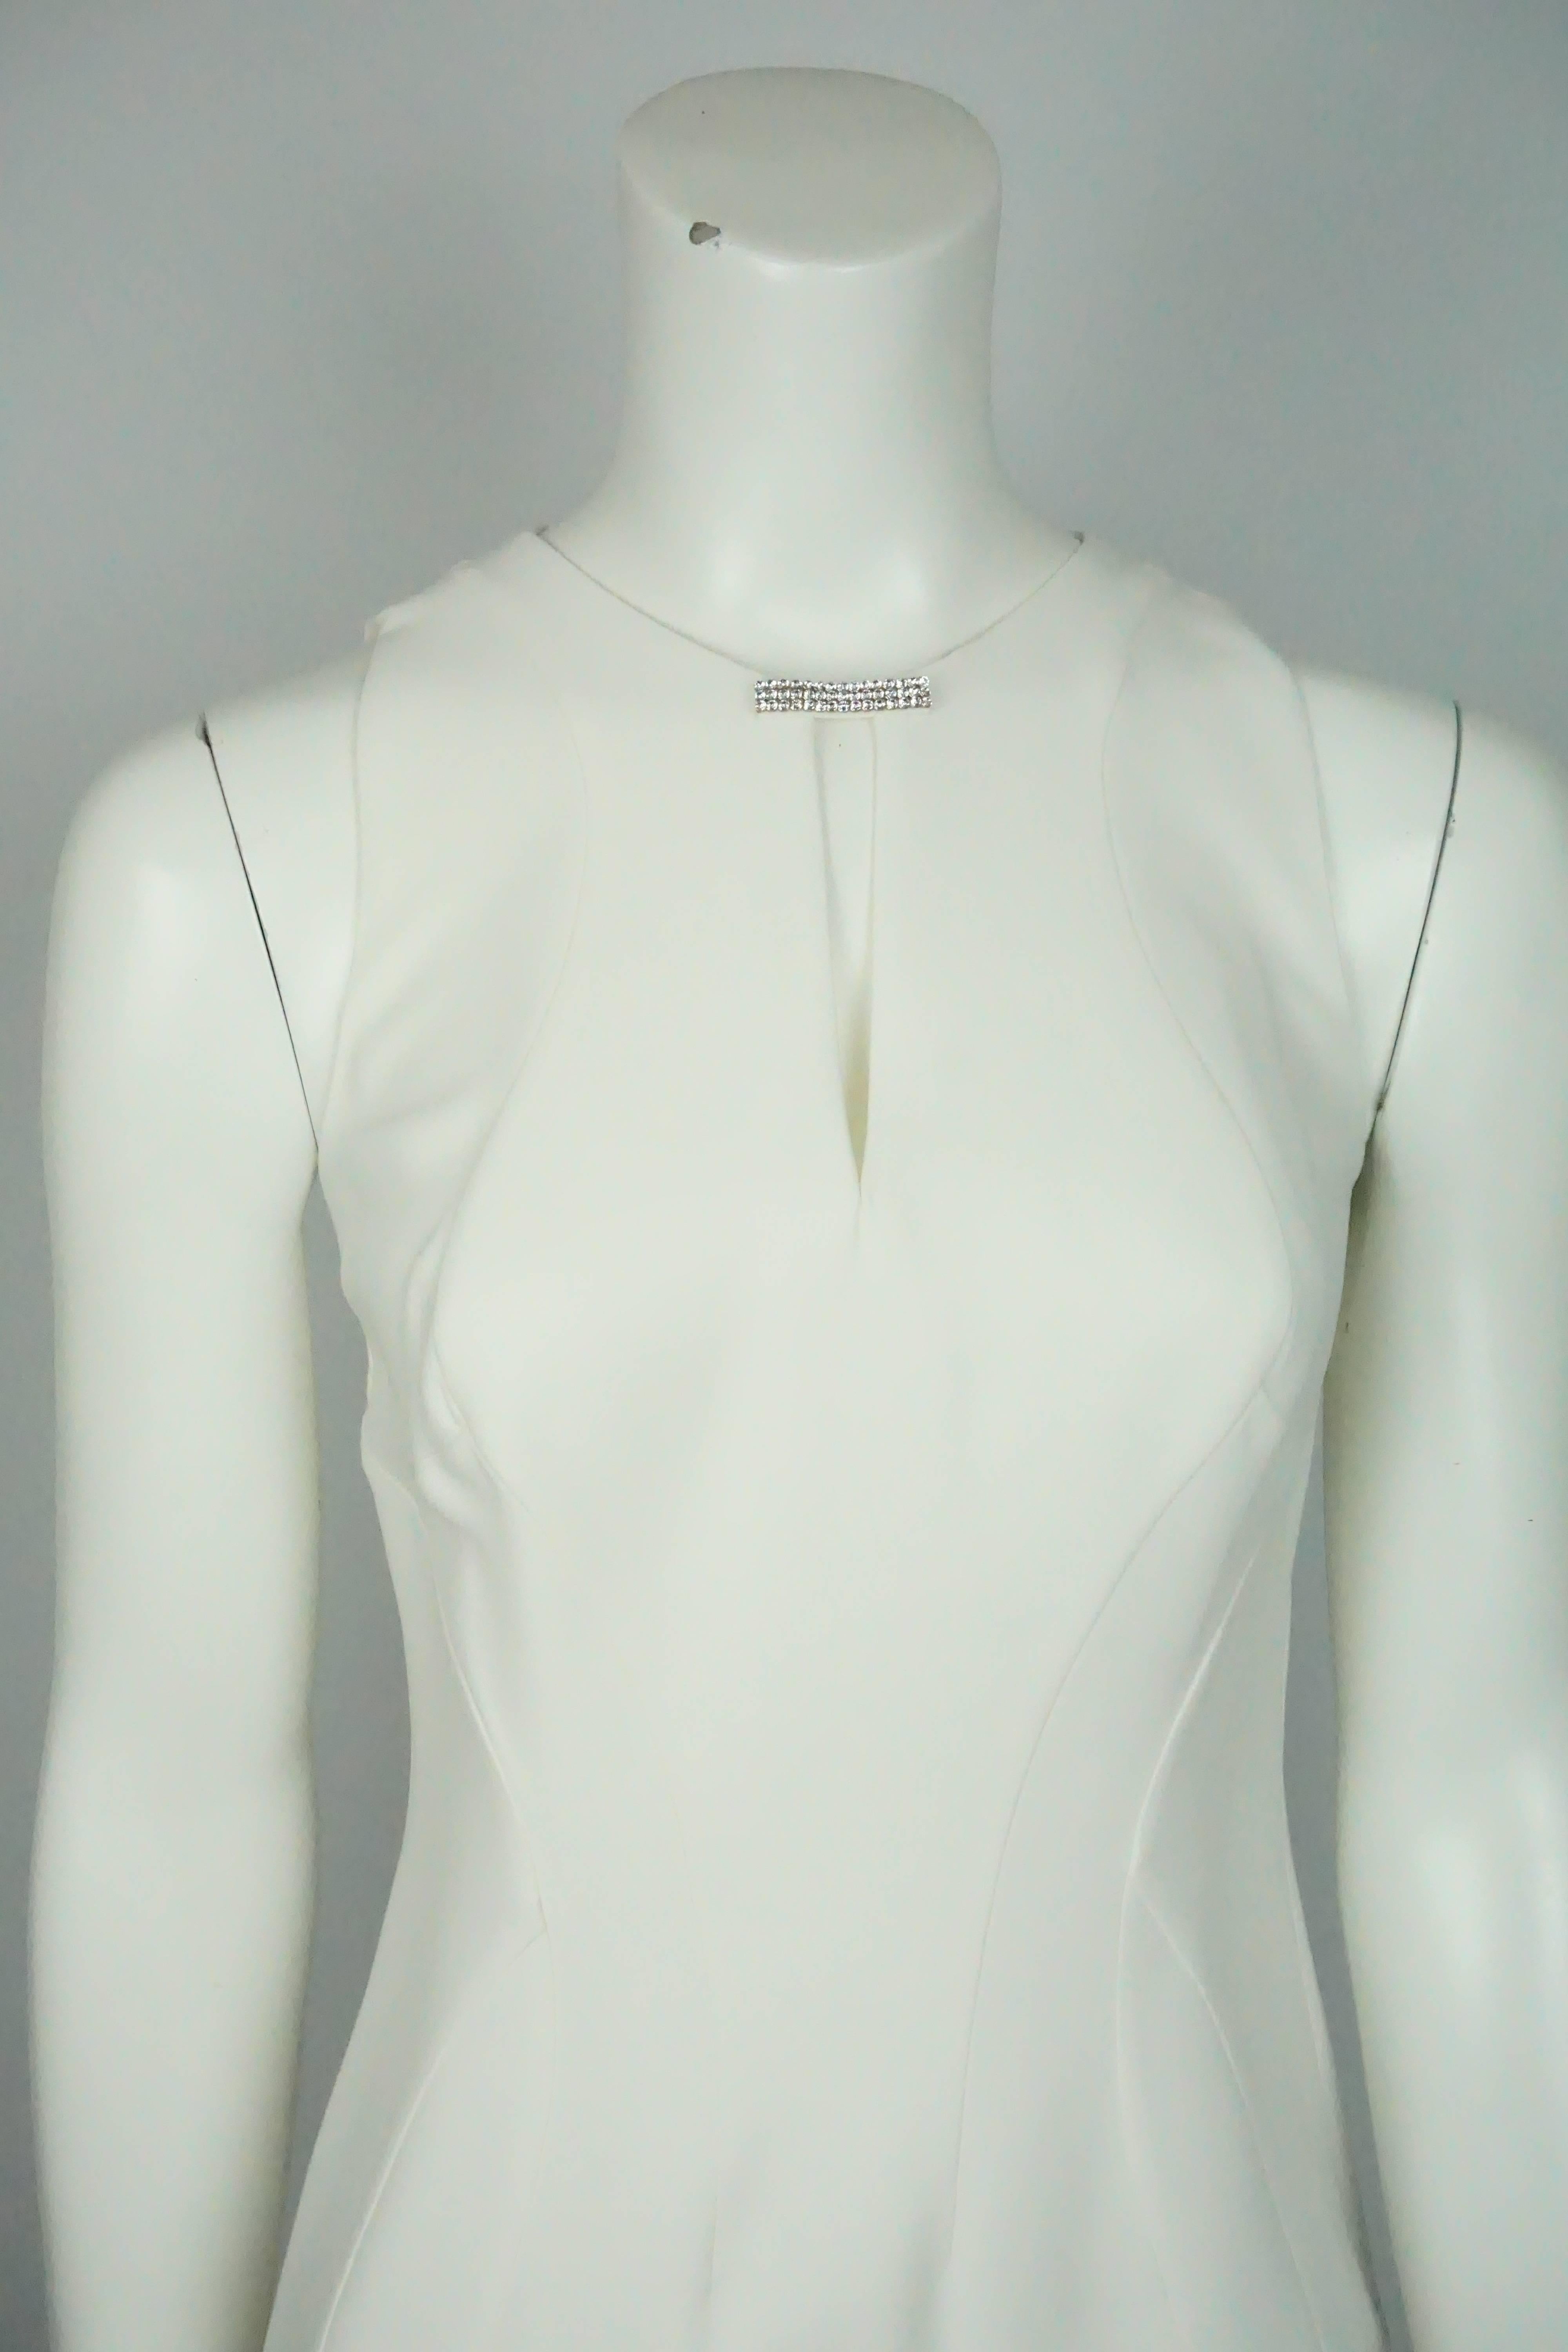 Versace Ivory Silk Sleeveless Dress  In Excellent Condition For Sale In West Palm Beach, FL